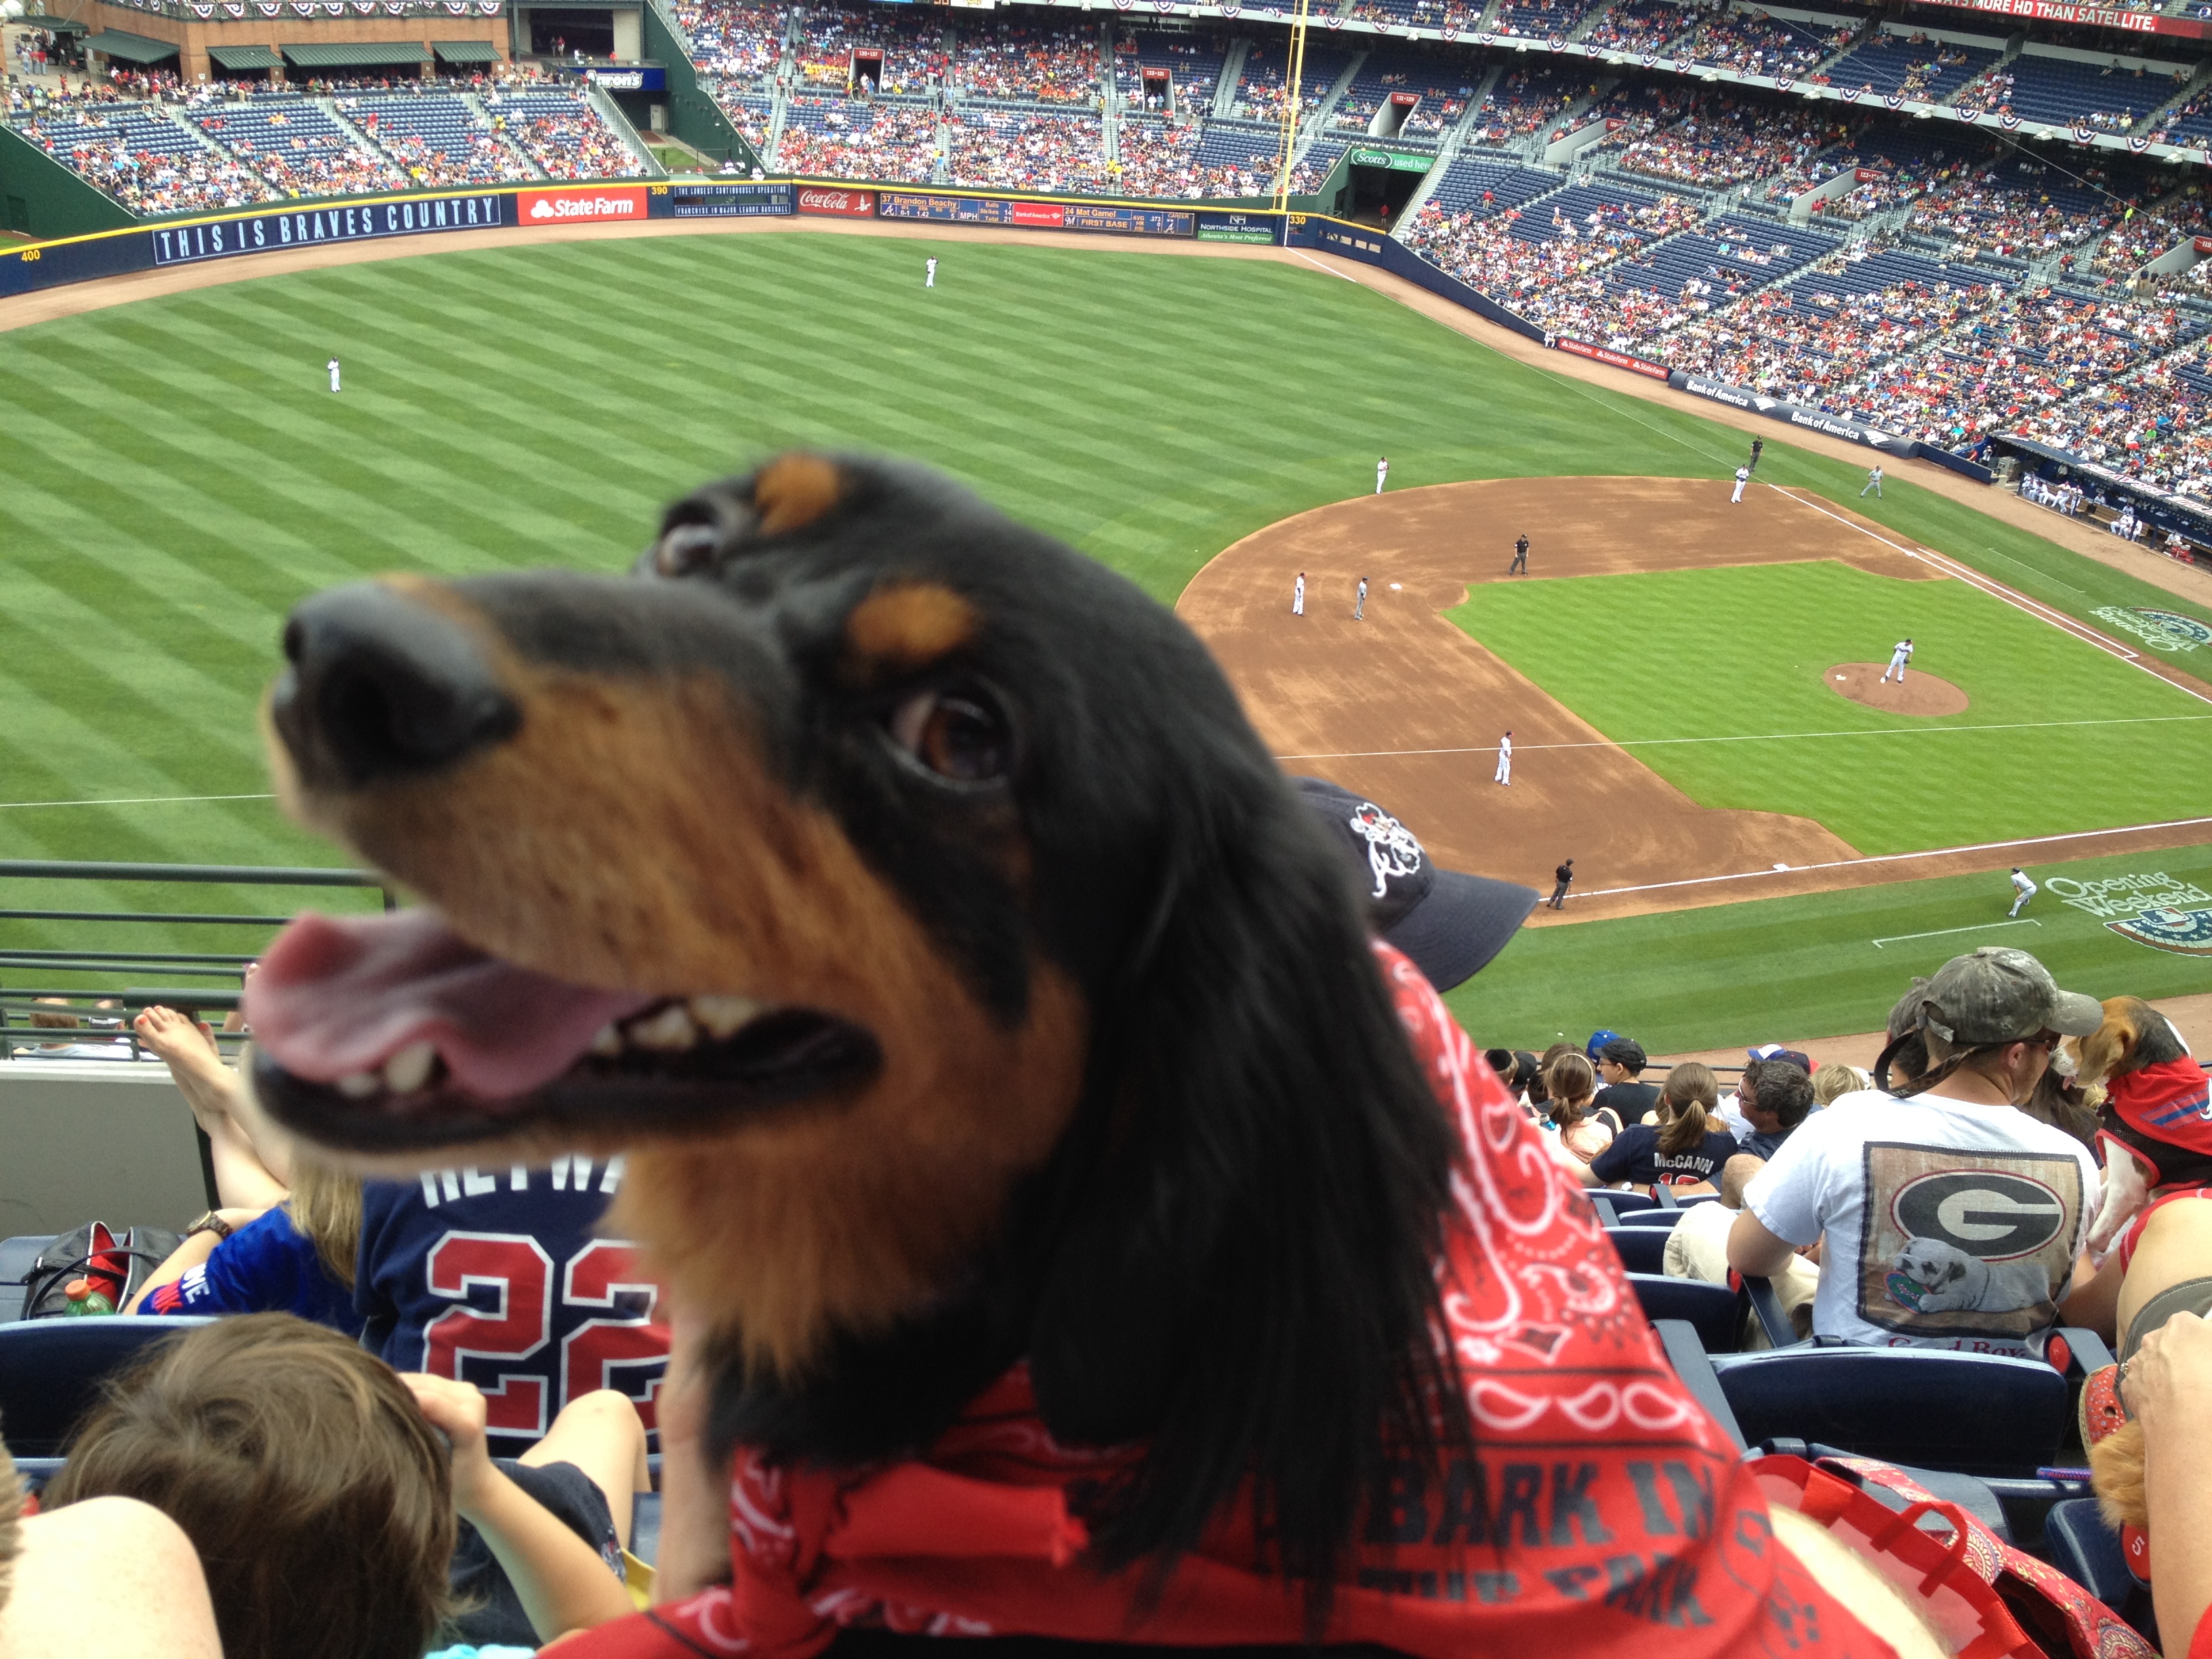 Heidi at the Braves game